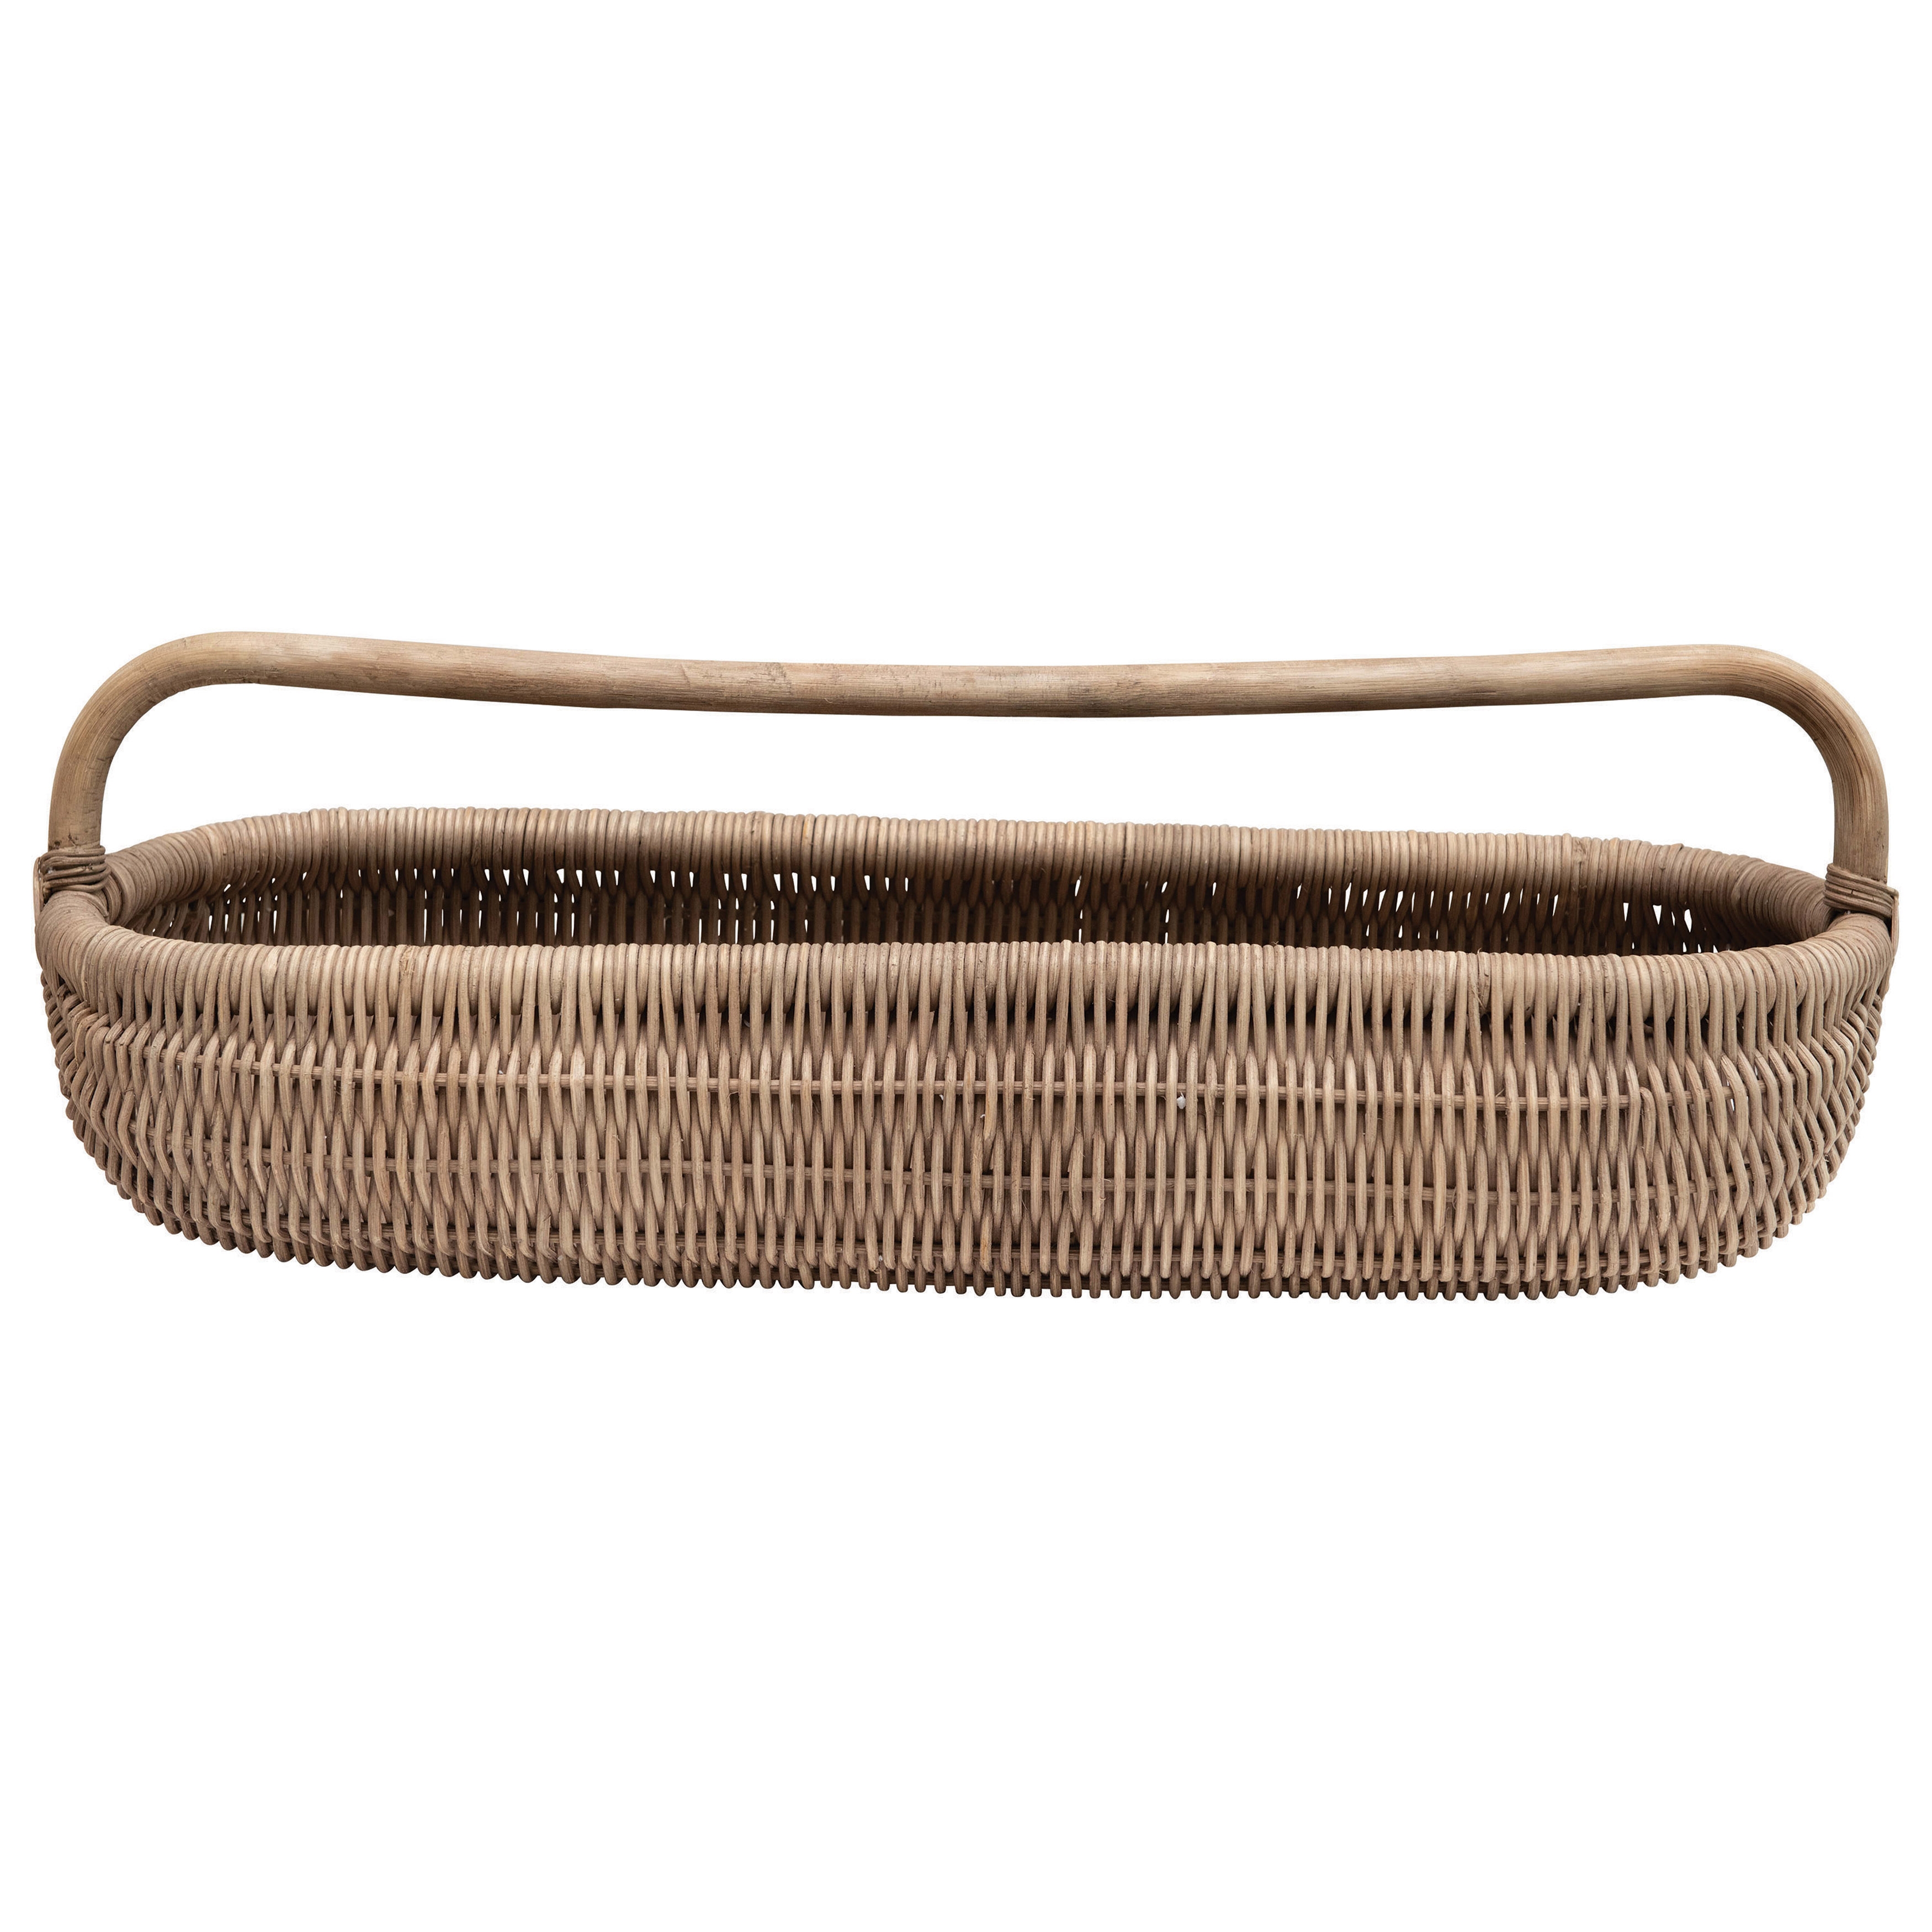 Hand-Woven Rattan Basket with Handle, Natural - Image 0